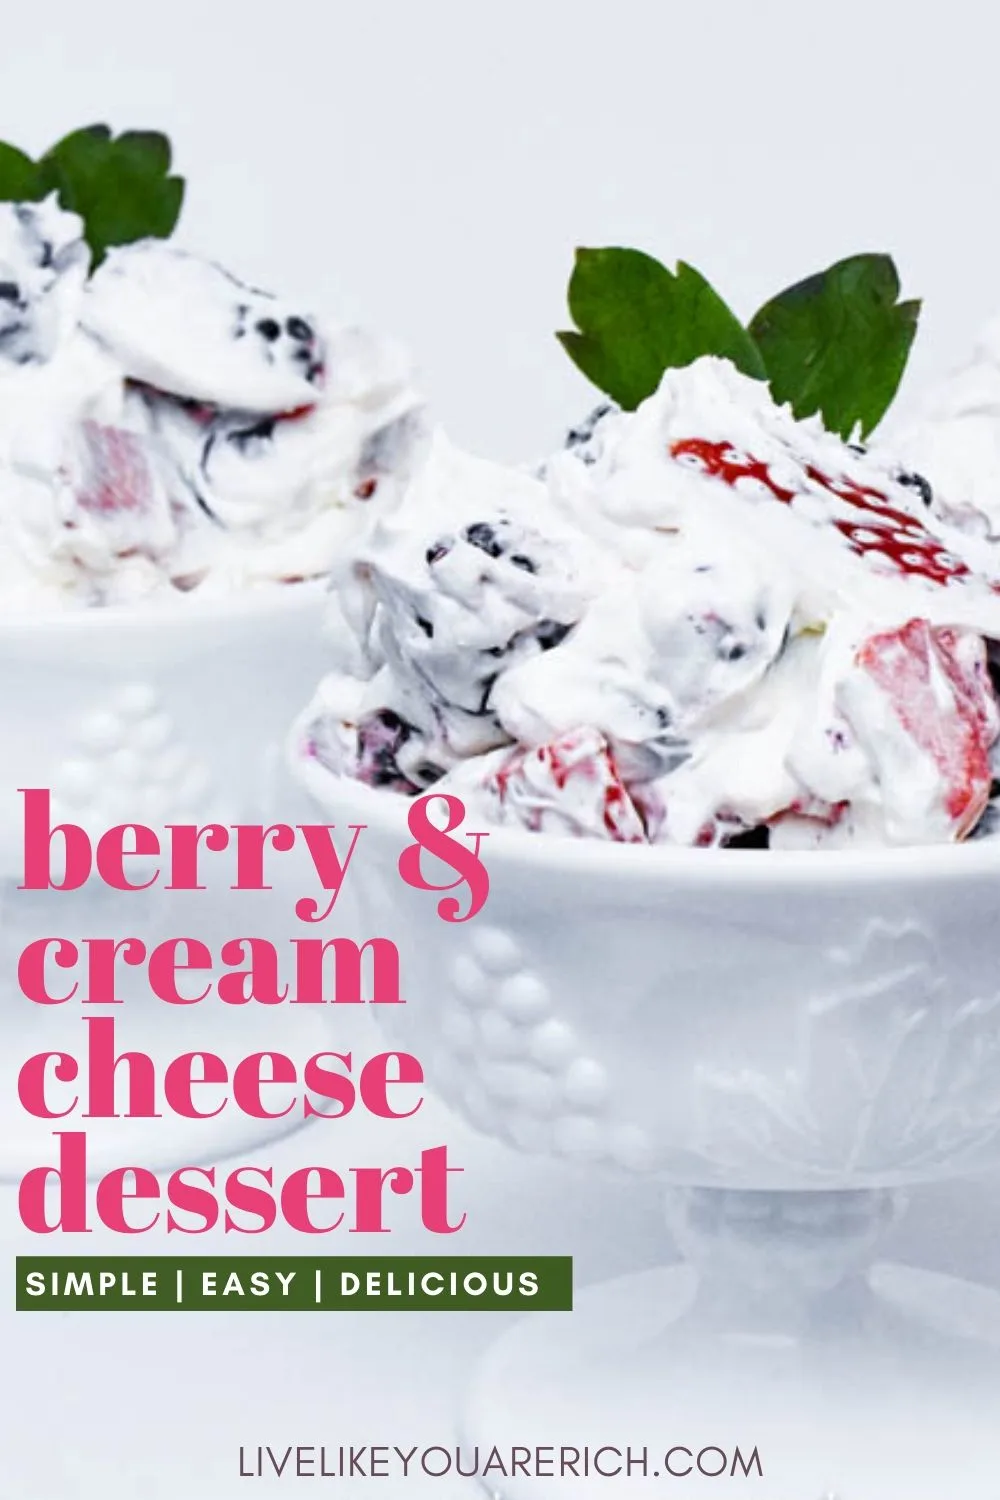 This Amazingly Delicious Cream Cheese Berry Dessert is made of fresh fruit further sweetened with pure vanilla extract, powdered sugar, and cool whip. To balance out the sweet, the cream cheese gives the dessert a delicious depth of flavor. Top it off with graham cracker crumbs for additional texture and flavor. #berrydessert #dessert